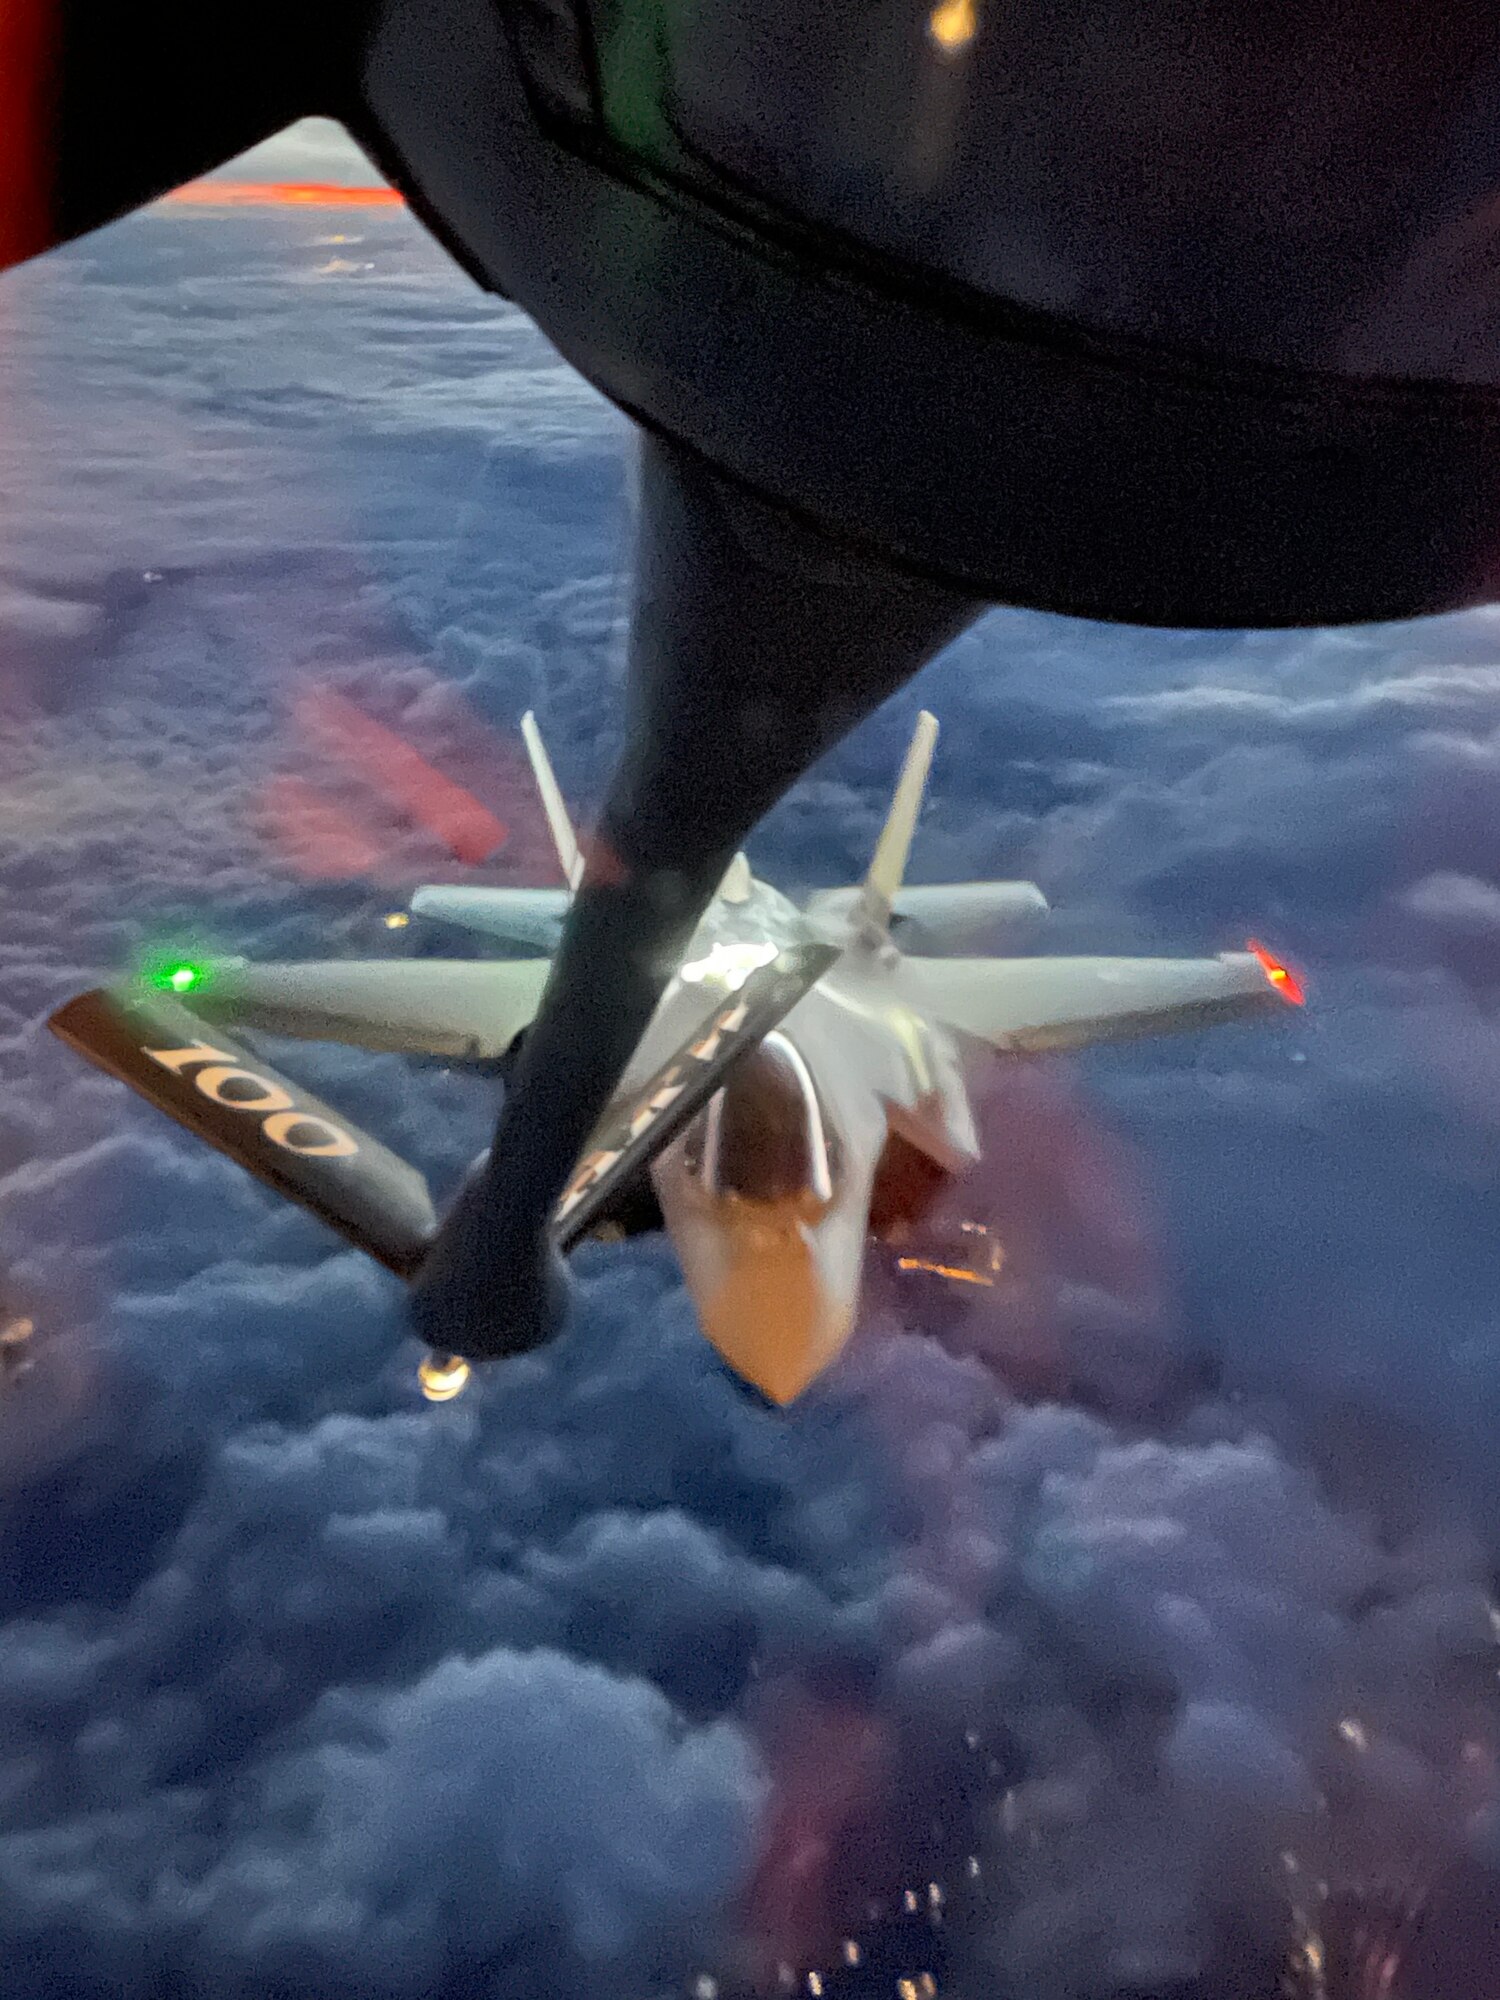 A Norwegian air force F-35A Lighting II aircraft approaches a U.S. Air Force KC-135 Stratotanker aircraft assigned to the 100th Air Refueling Wing, Royal Air Force Mildenhall, England, to receive fuel during exercise Castle Forge over Norway, Nov. 4, 2021. The complexity of the European continent makes operating with allies and partners throughout Europe an imperative. In addition to F-15 Eagle aircraft operations in the Black Sea Region, Castle Forge encompasses the USAFE-wide Agile Combat Employment capstone event. Castle Forge’s components will better enable forces to quickly disperse and continue to deliver air power from locations with varying levels of capacity and support, ensuring Airmen are always ready to respond to potential threats. (U.S. Air Force photo by Senior Airman Joseph Barron)